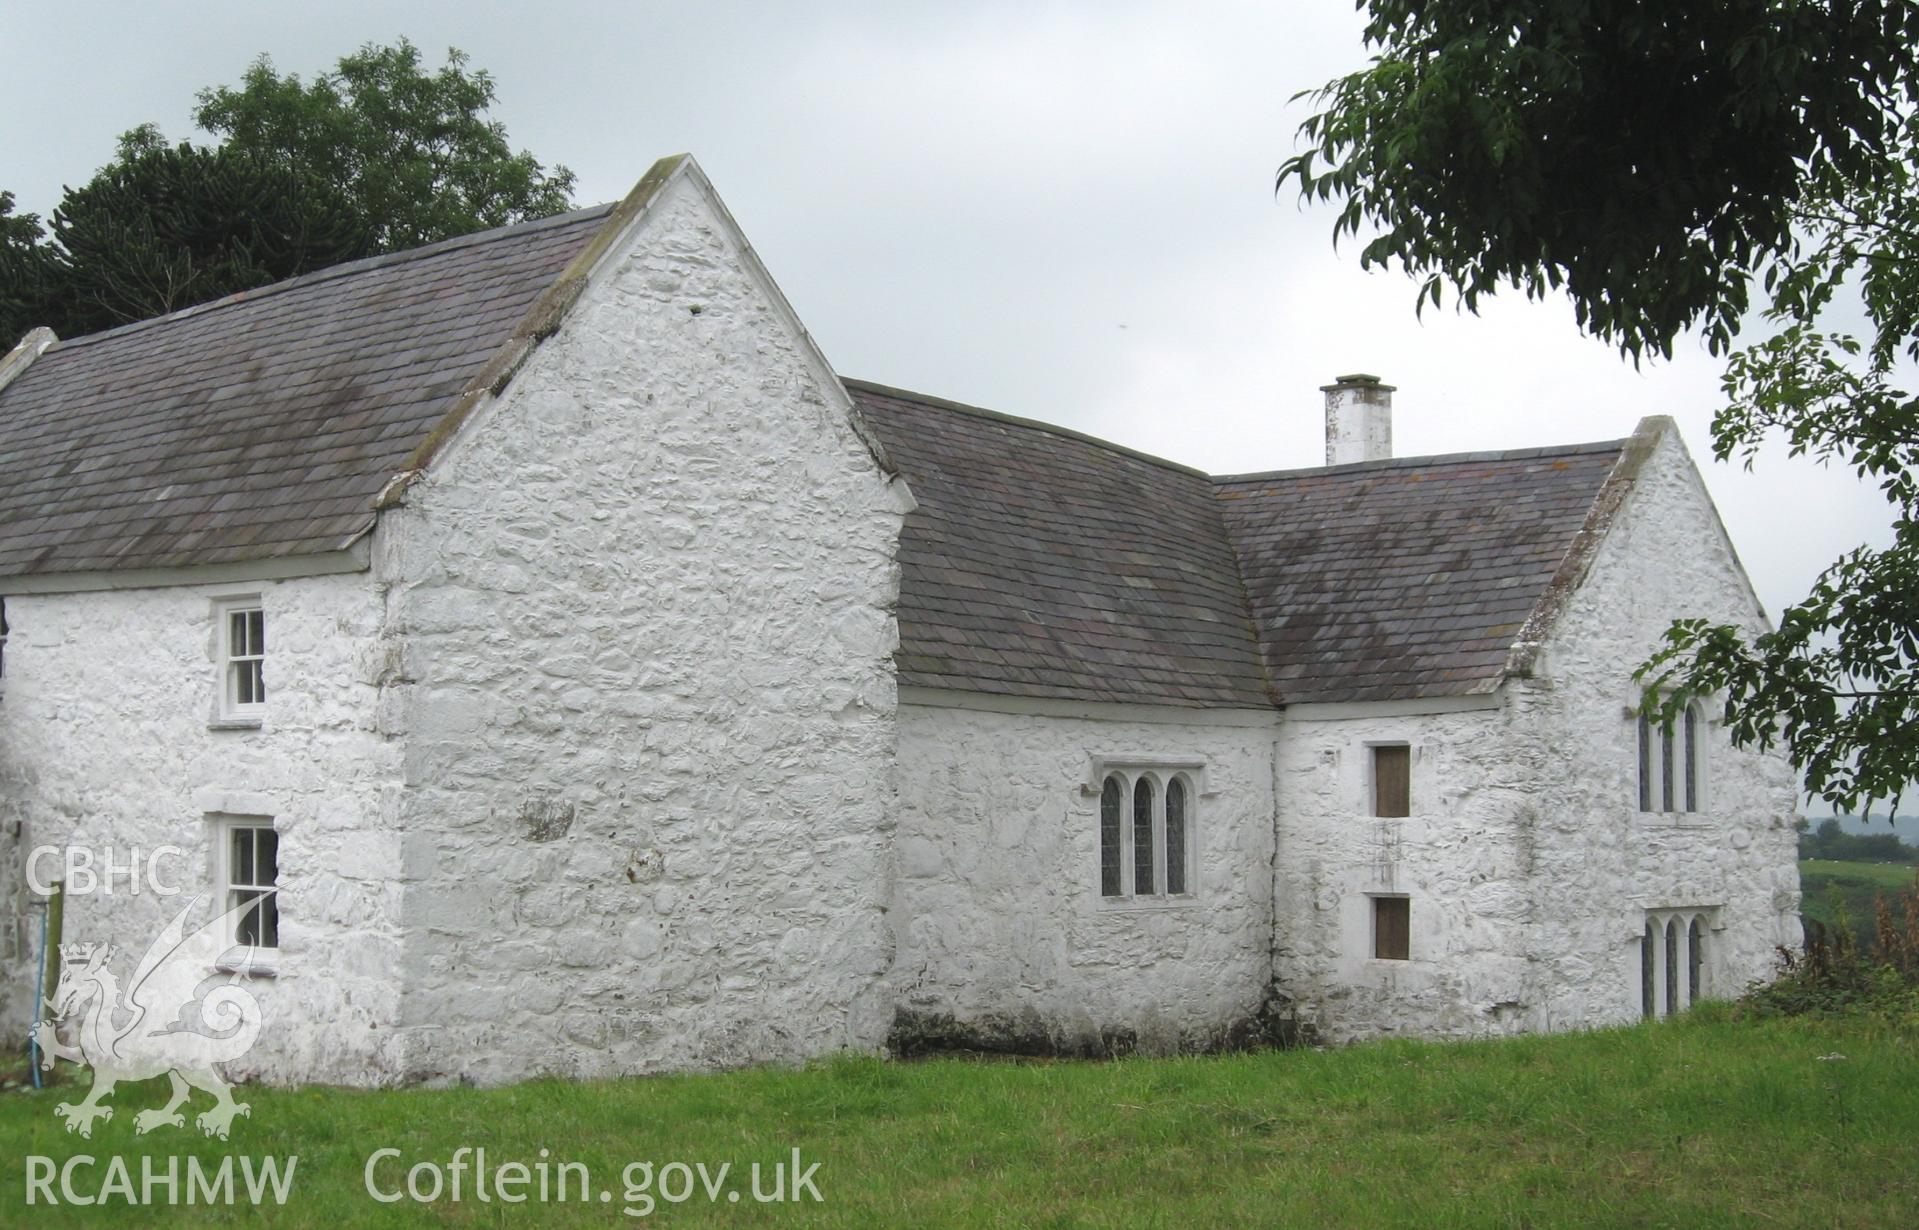 Colour photo showing Hafoty, Llansadwrn, taken by Paul R. Davis and dated 10th May 2006.